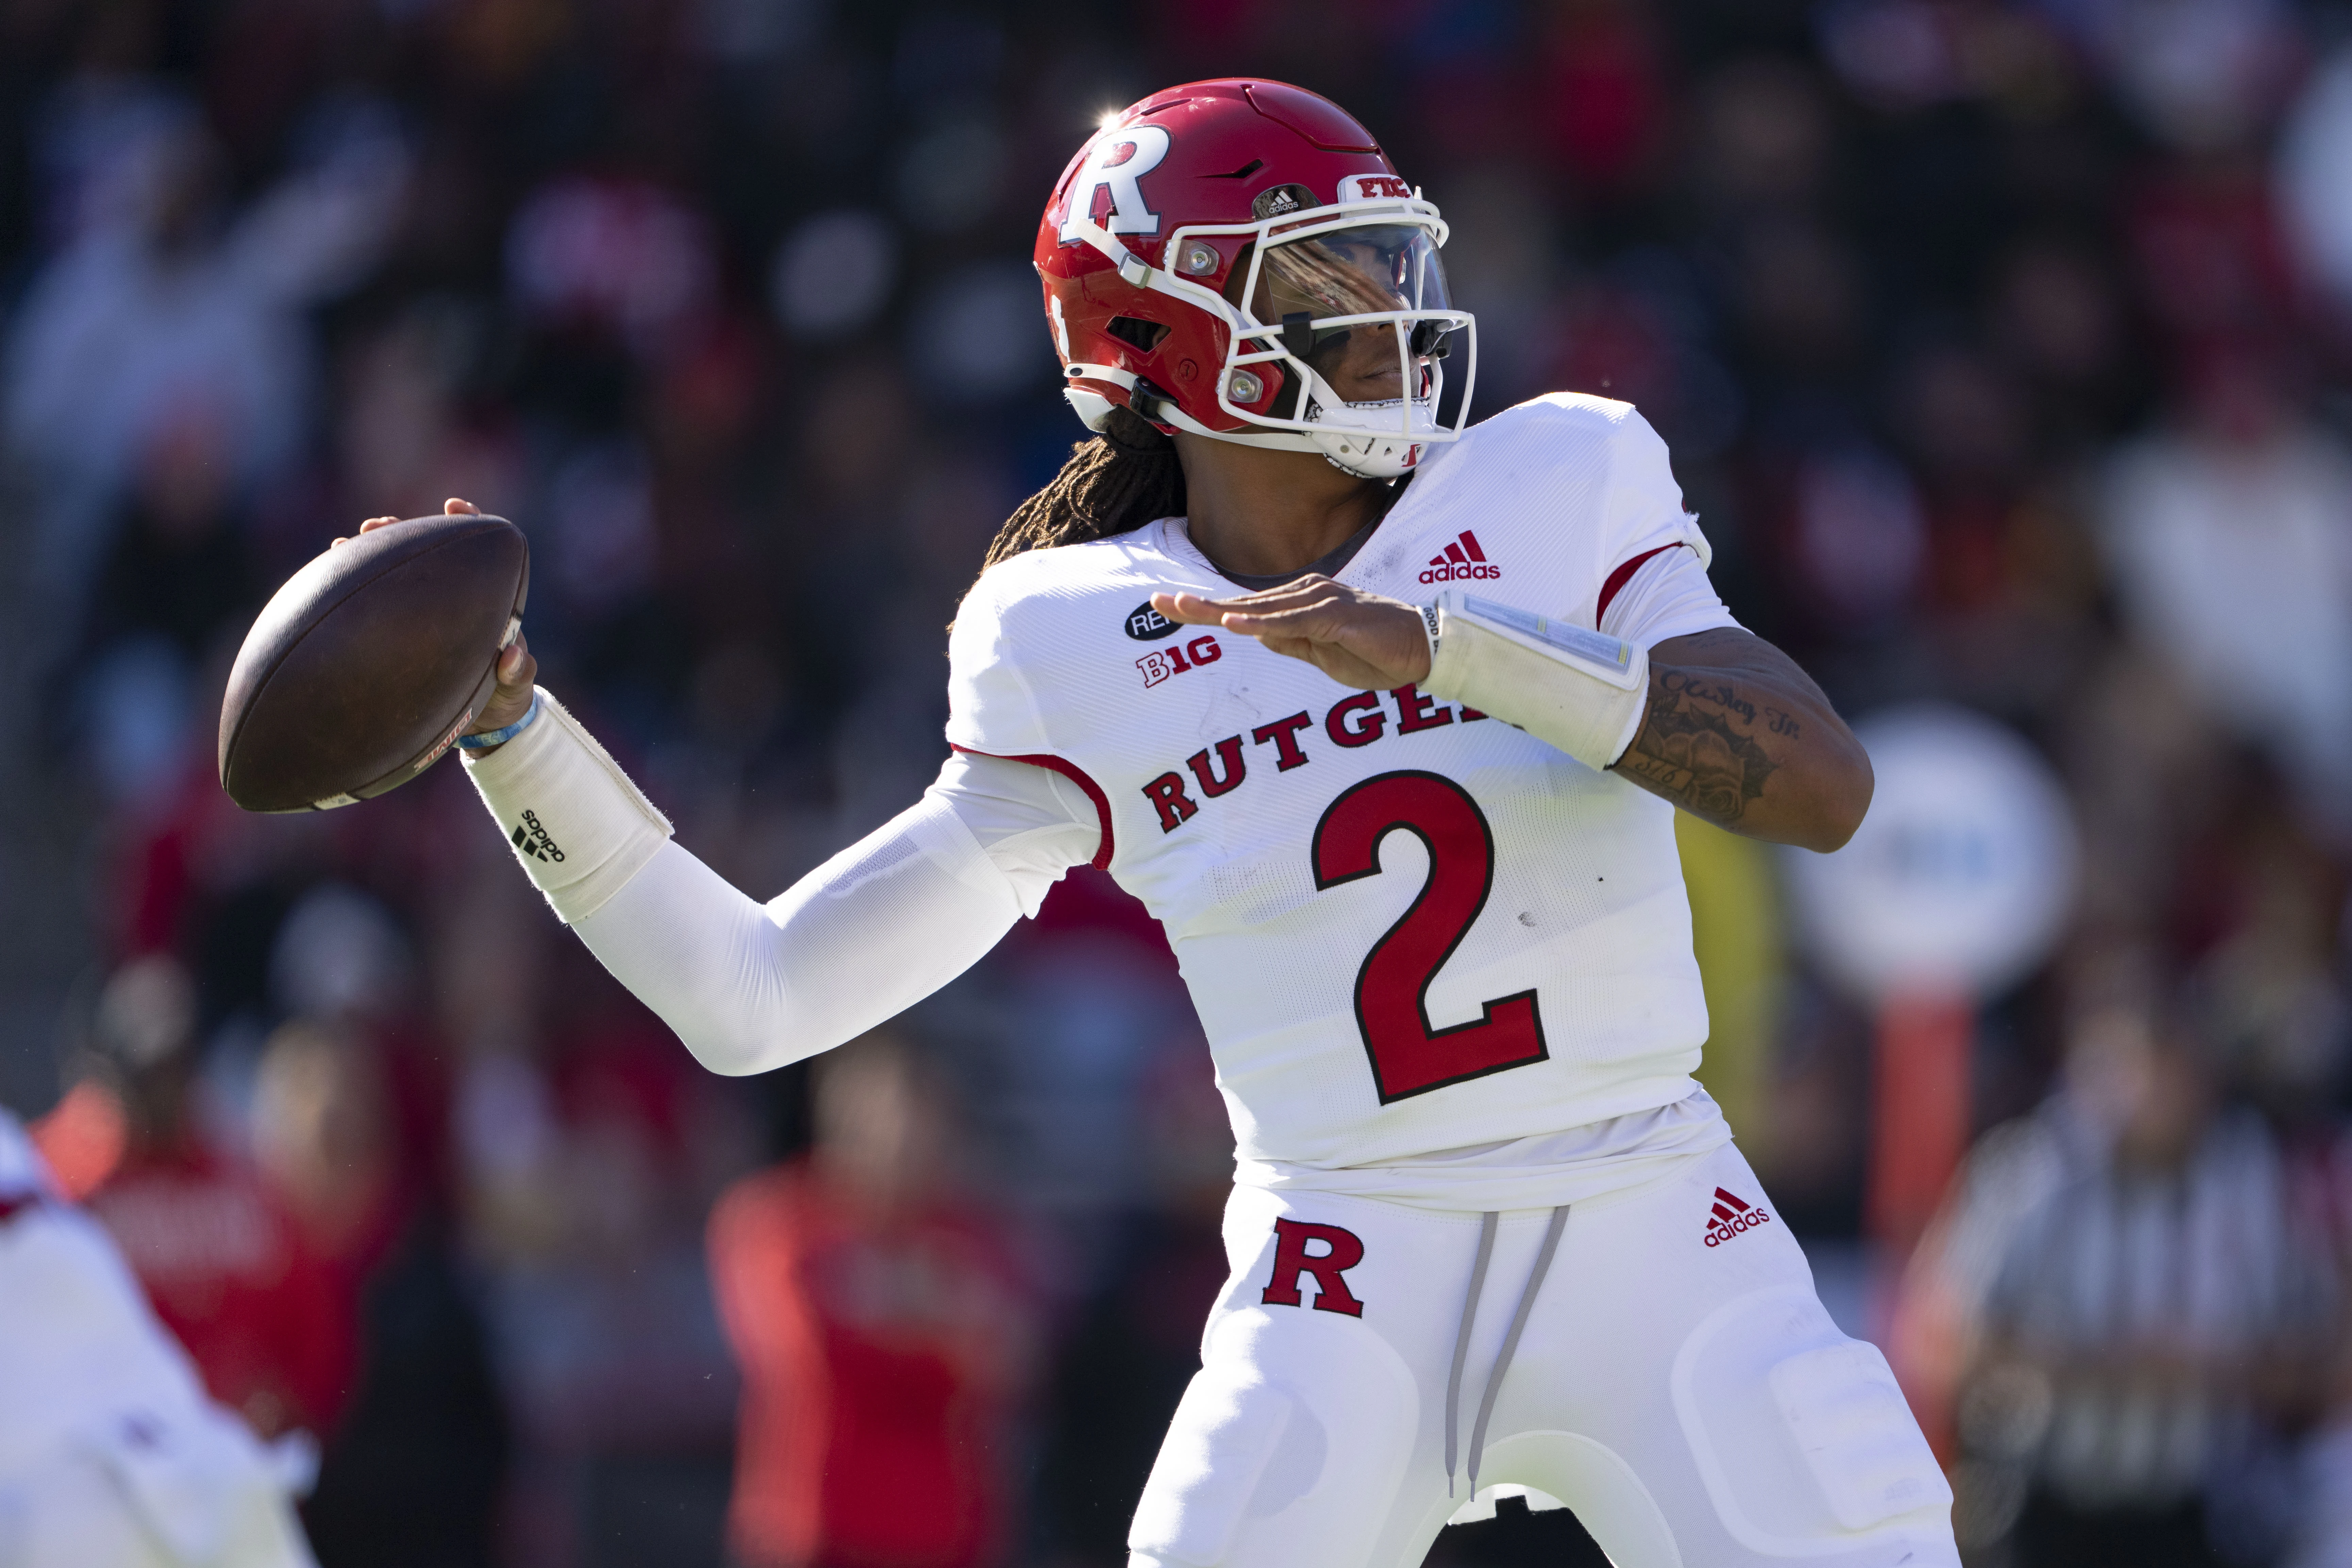 How to Watch the Rutgers vs. Northwestern Game: Streaming & TV Info